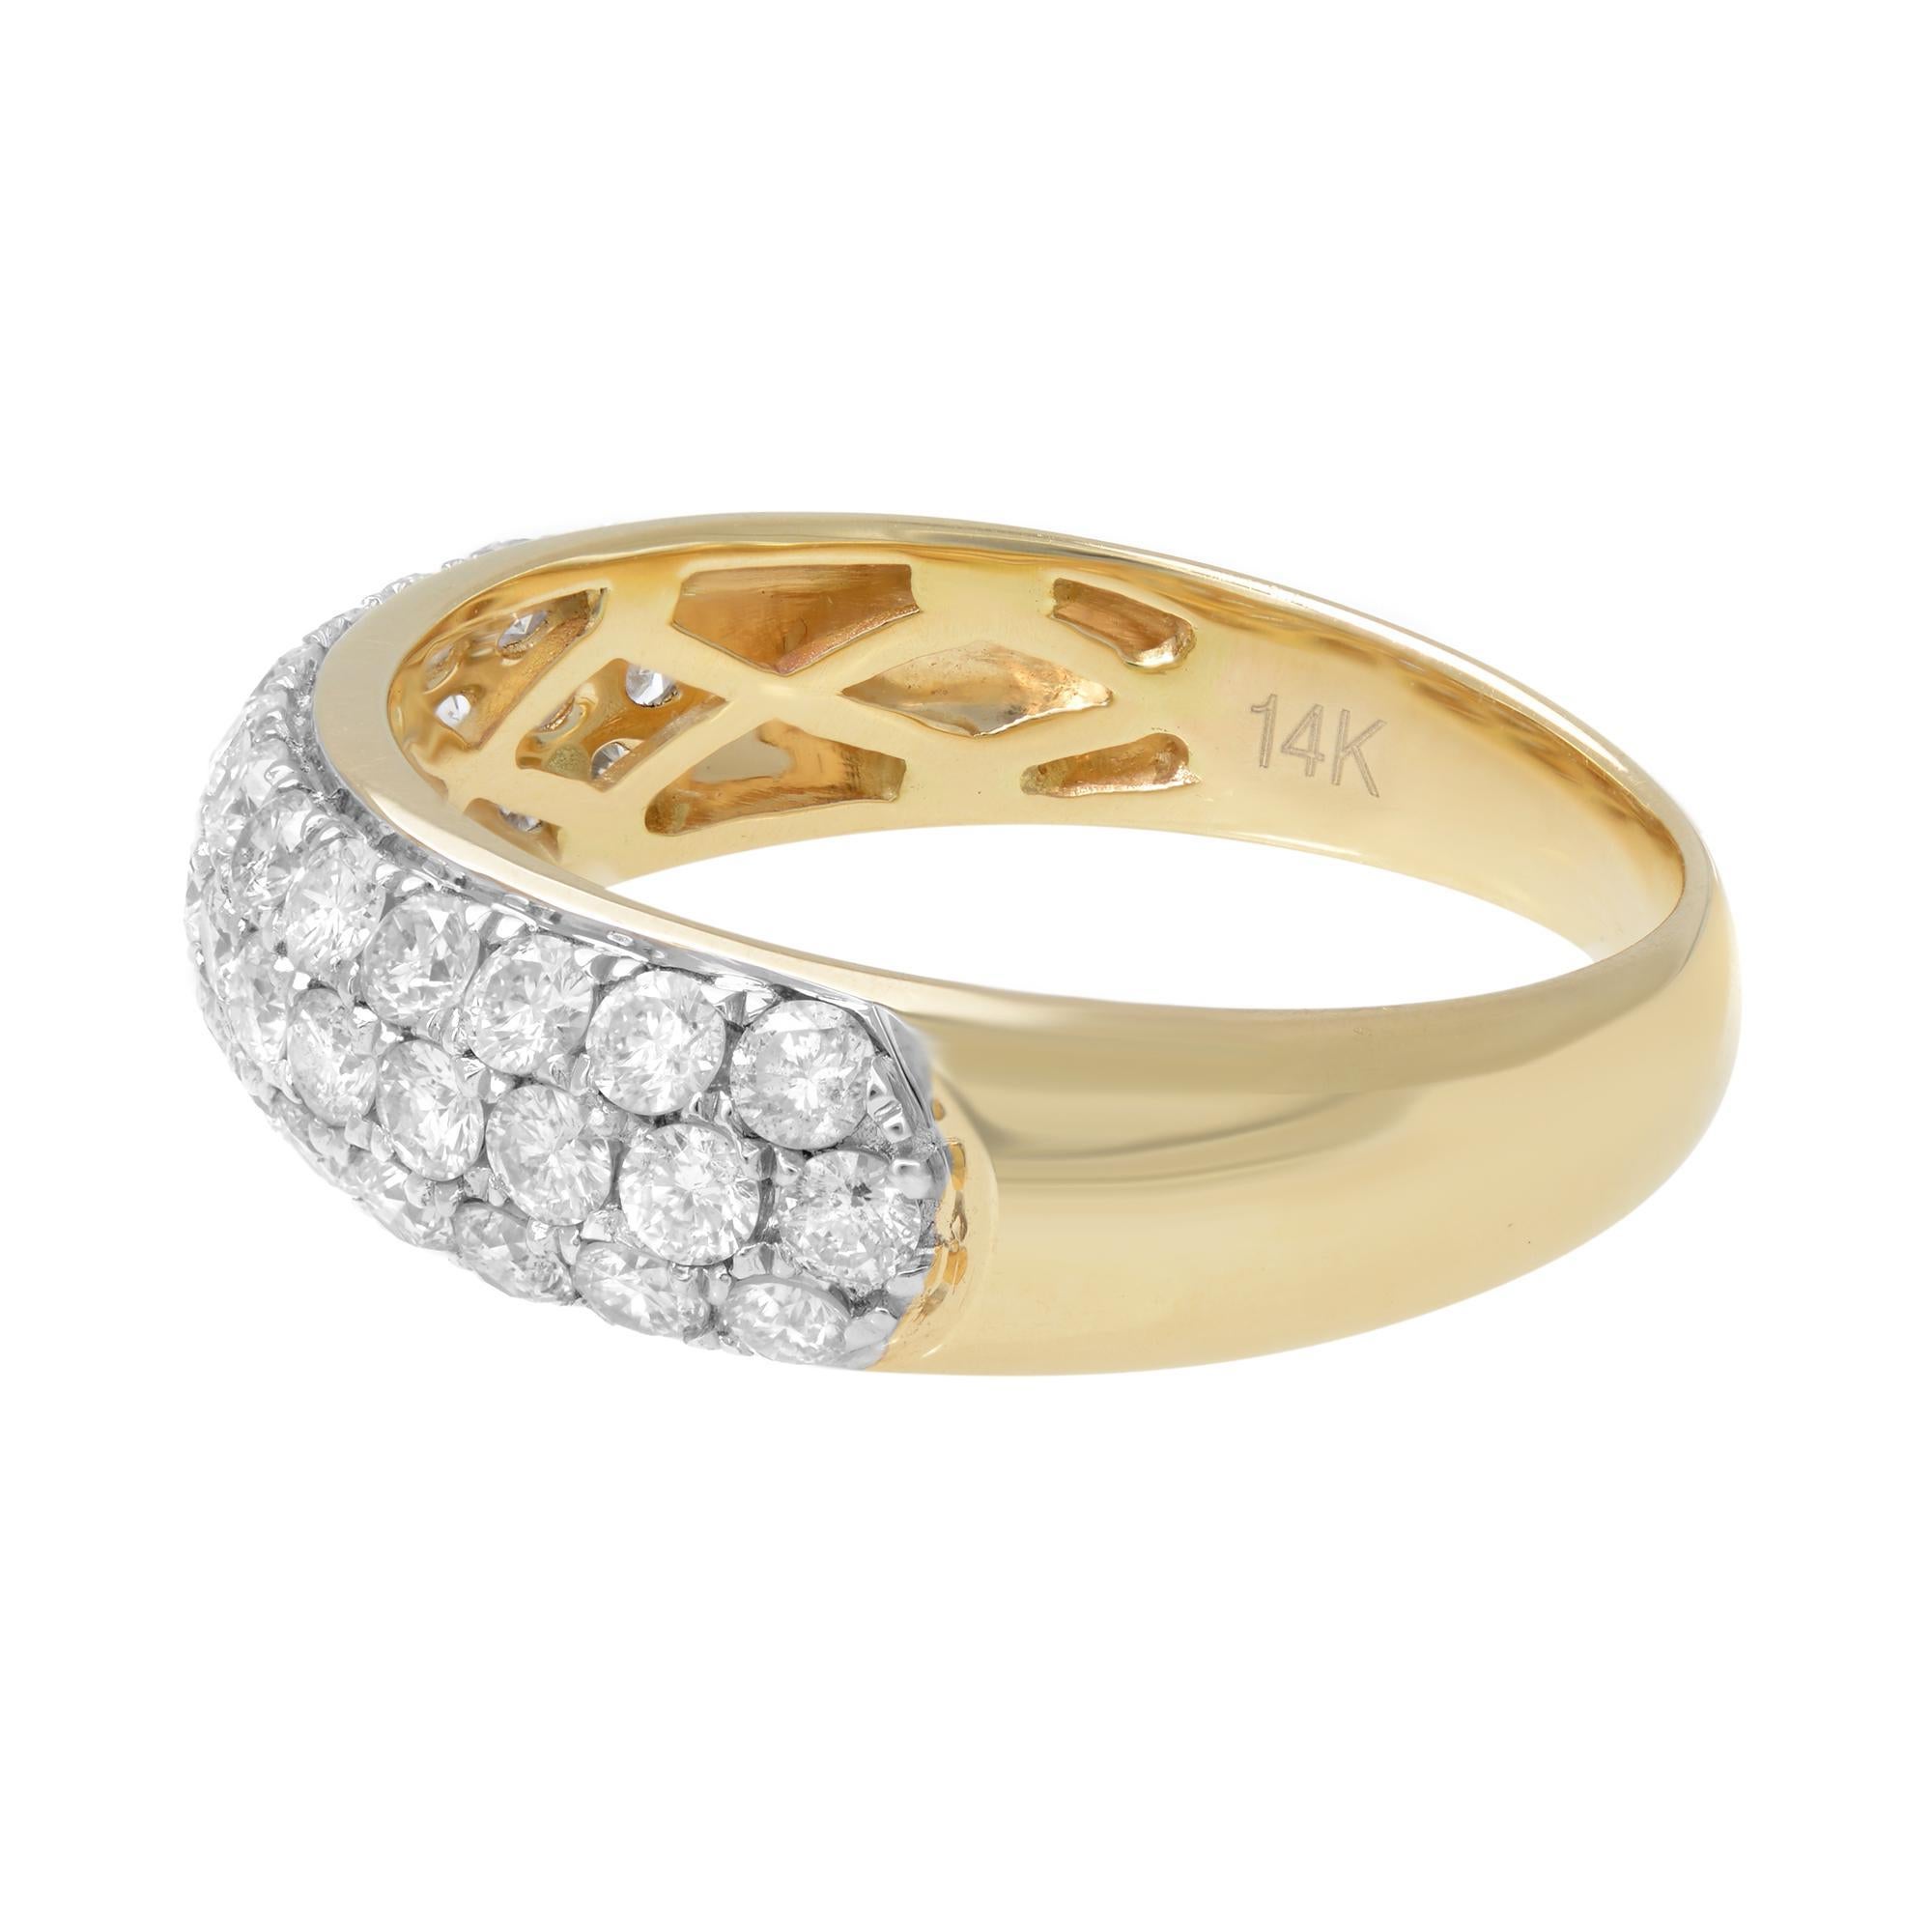 This stylish diamond band features three rows of round brilliant pave-set diamonds. Currently priced with diamonds going halfway around the band, totaling 1.04cttw. Diamond color G and VS clarity. The ring is crafted in 14k yellow gold. Ring size